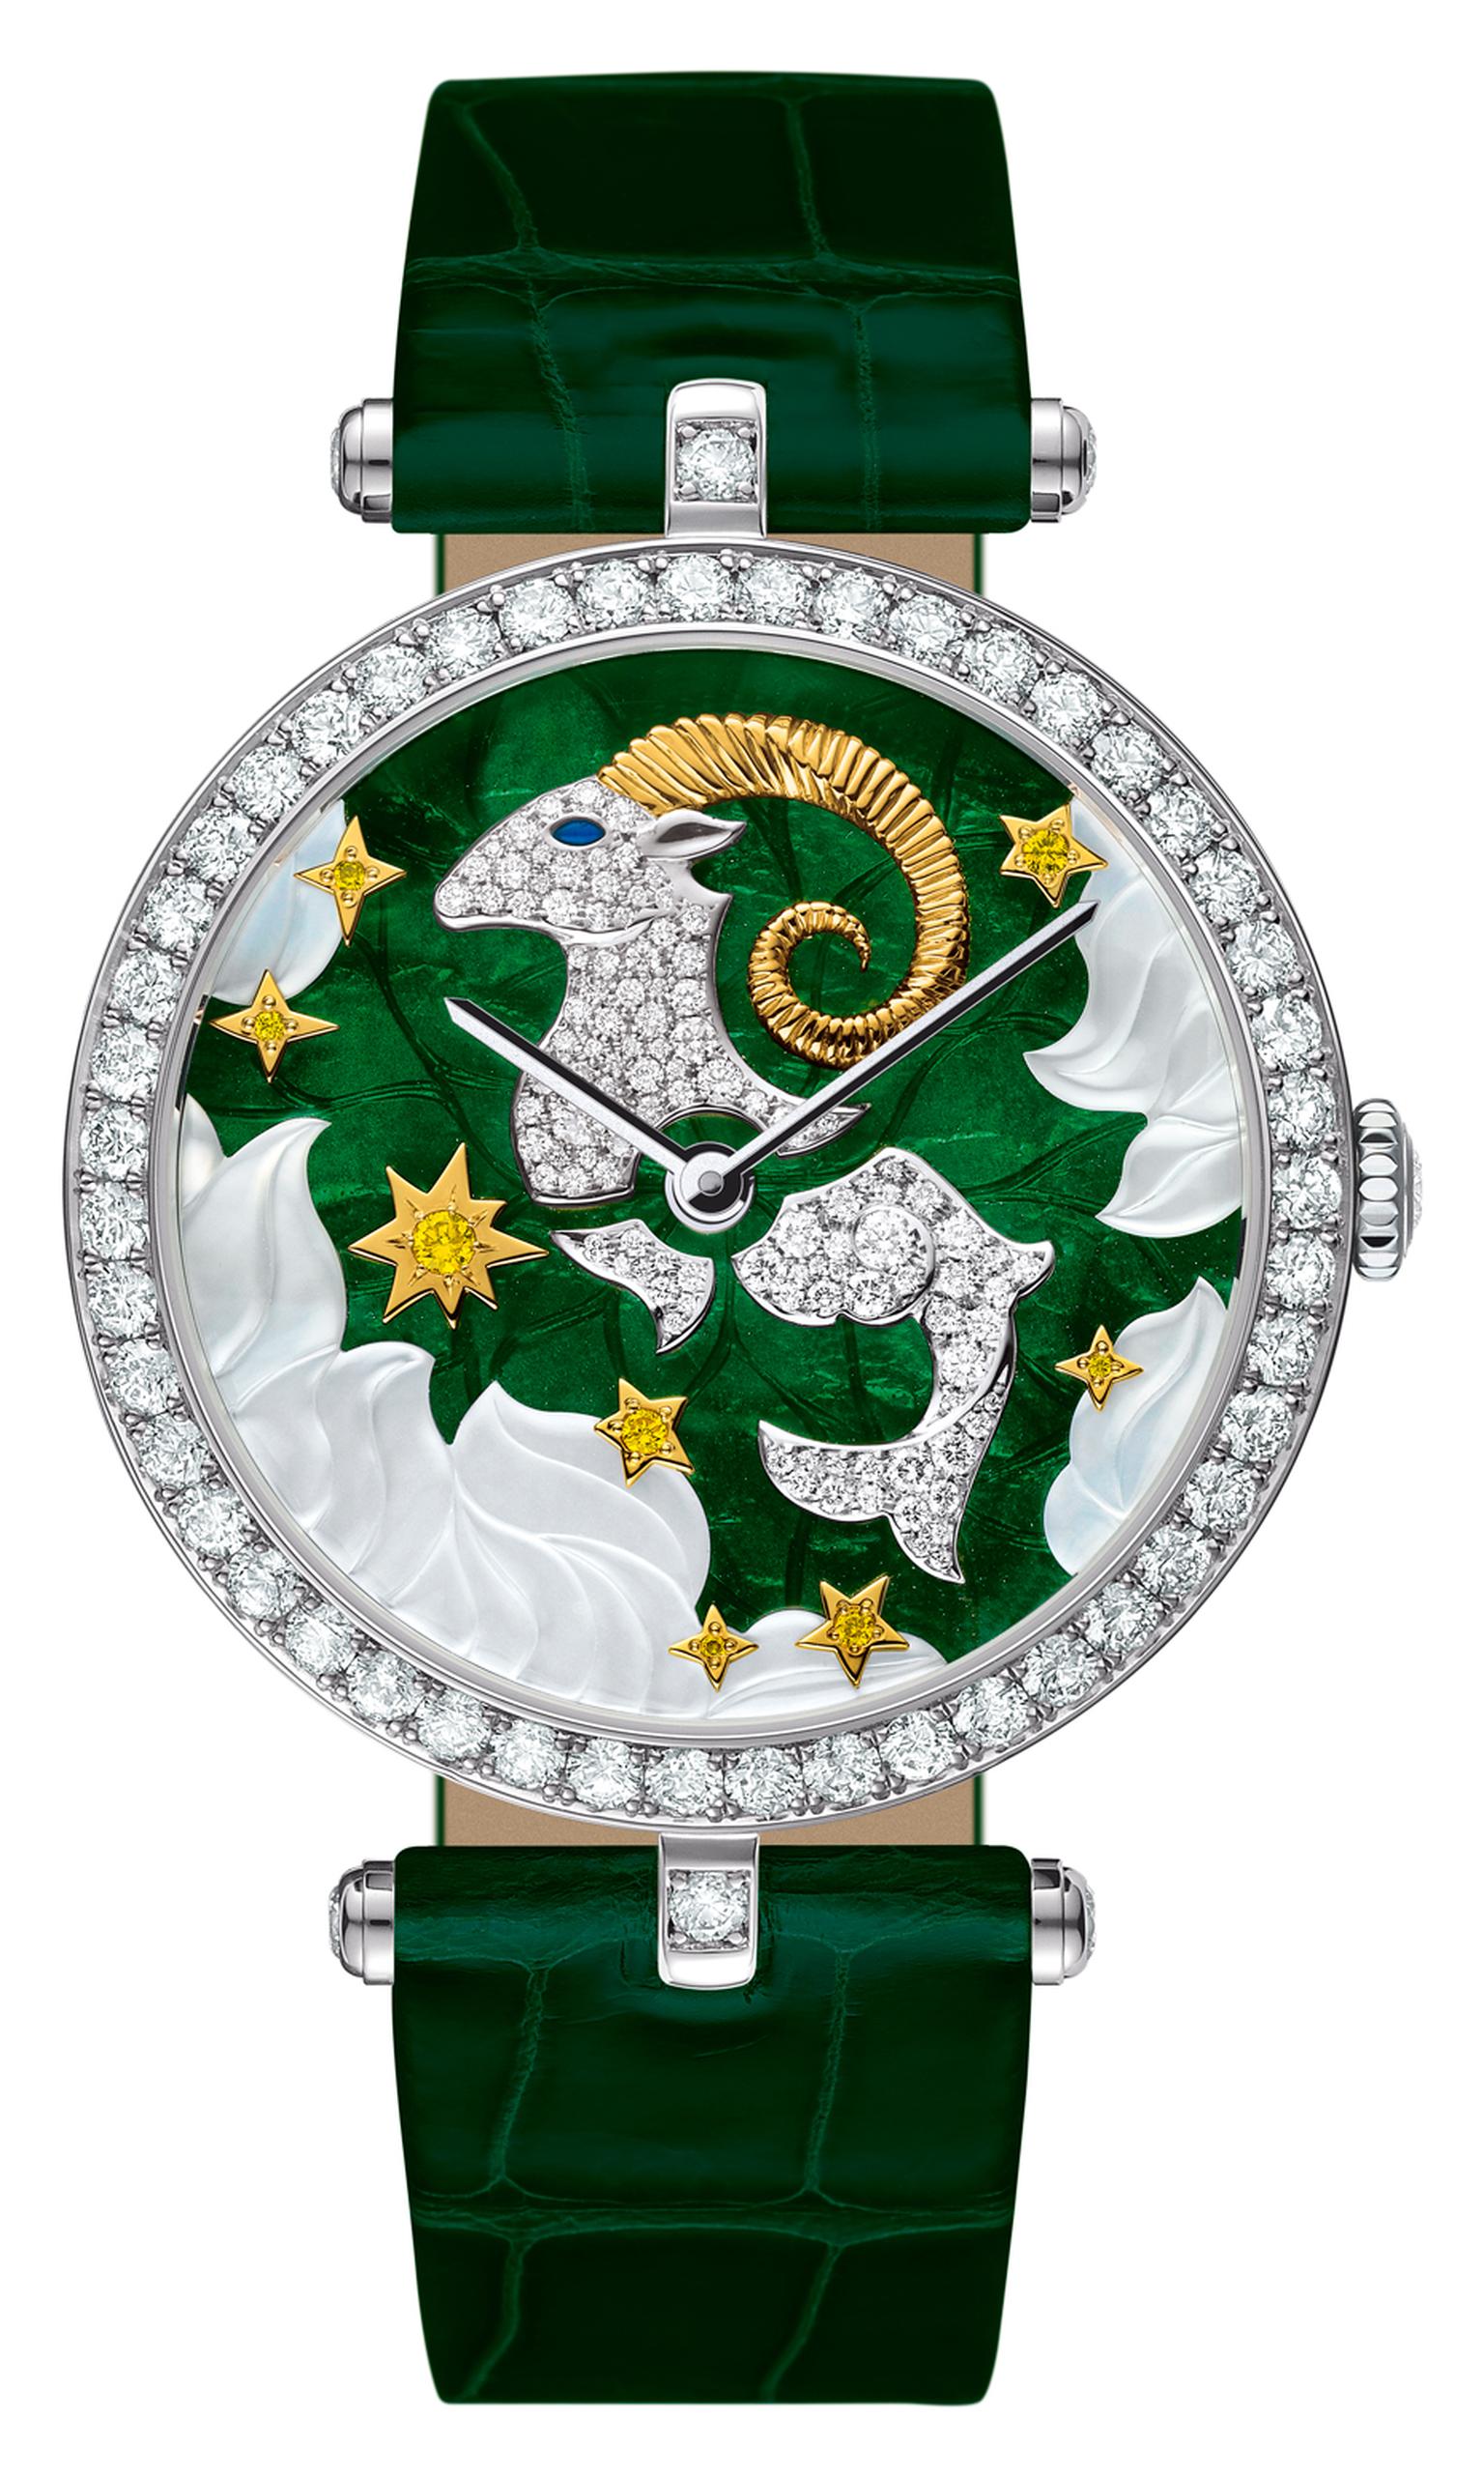 Van Cleef & Arpels high jewellery Lady Arpels Zodiac Capricorn watch in a white gold case. The beautiful green enamel dial is enlivened with touches of mother-of-pearl and white and yellow diamonds bringing the headstrong ram to life. Limited edition of 2